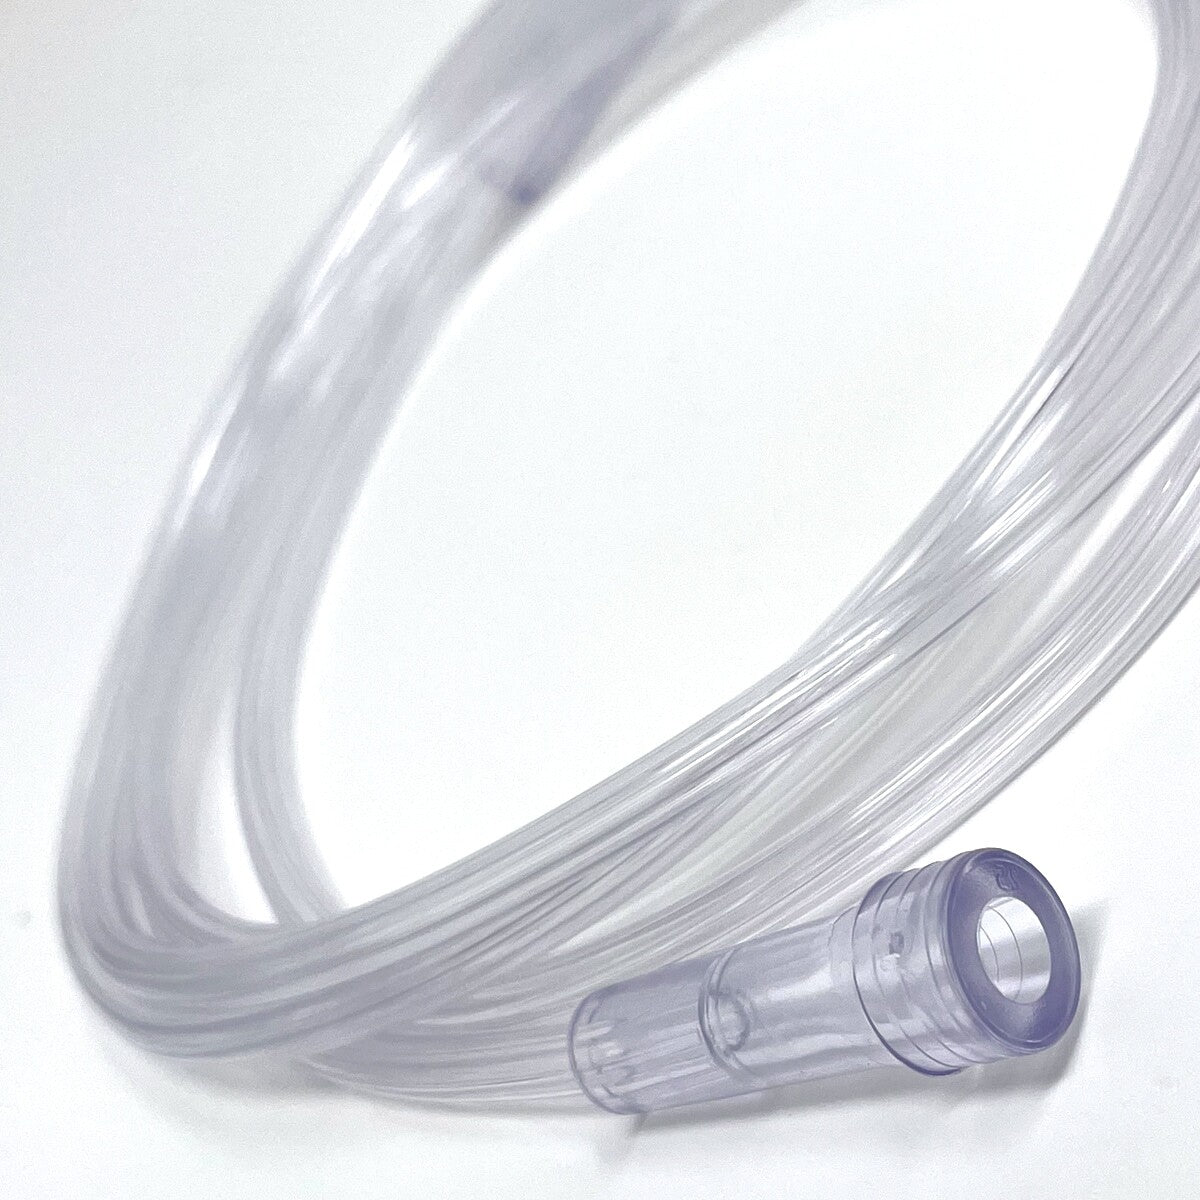 WestMed CLEAR Kink & Crush Resistant Oxygen Supply Tubing - 7 Foot - DISCONTINUED